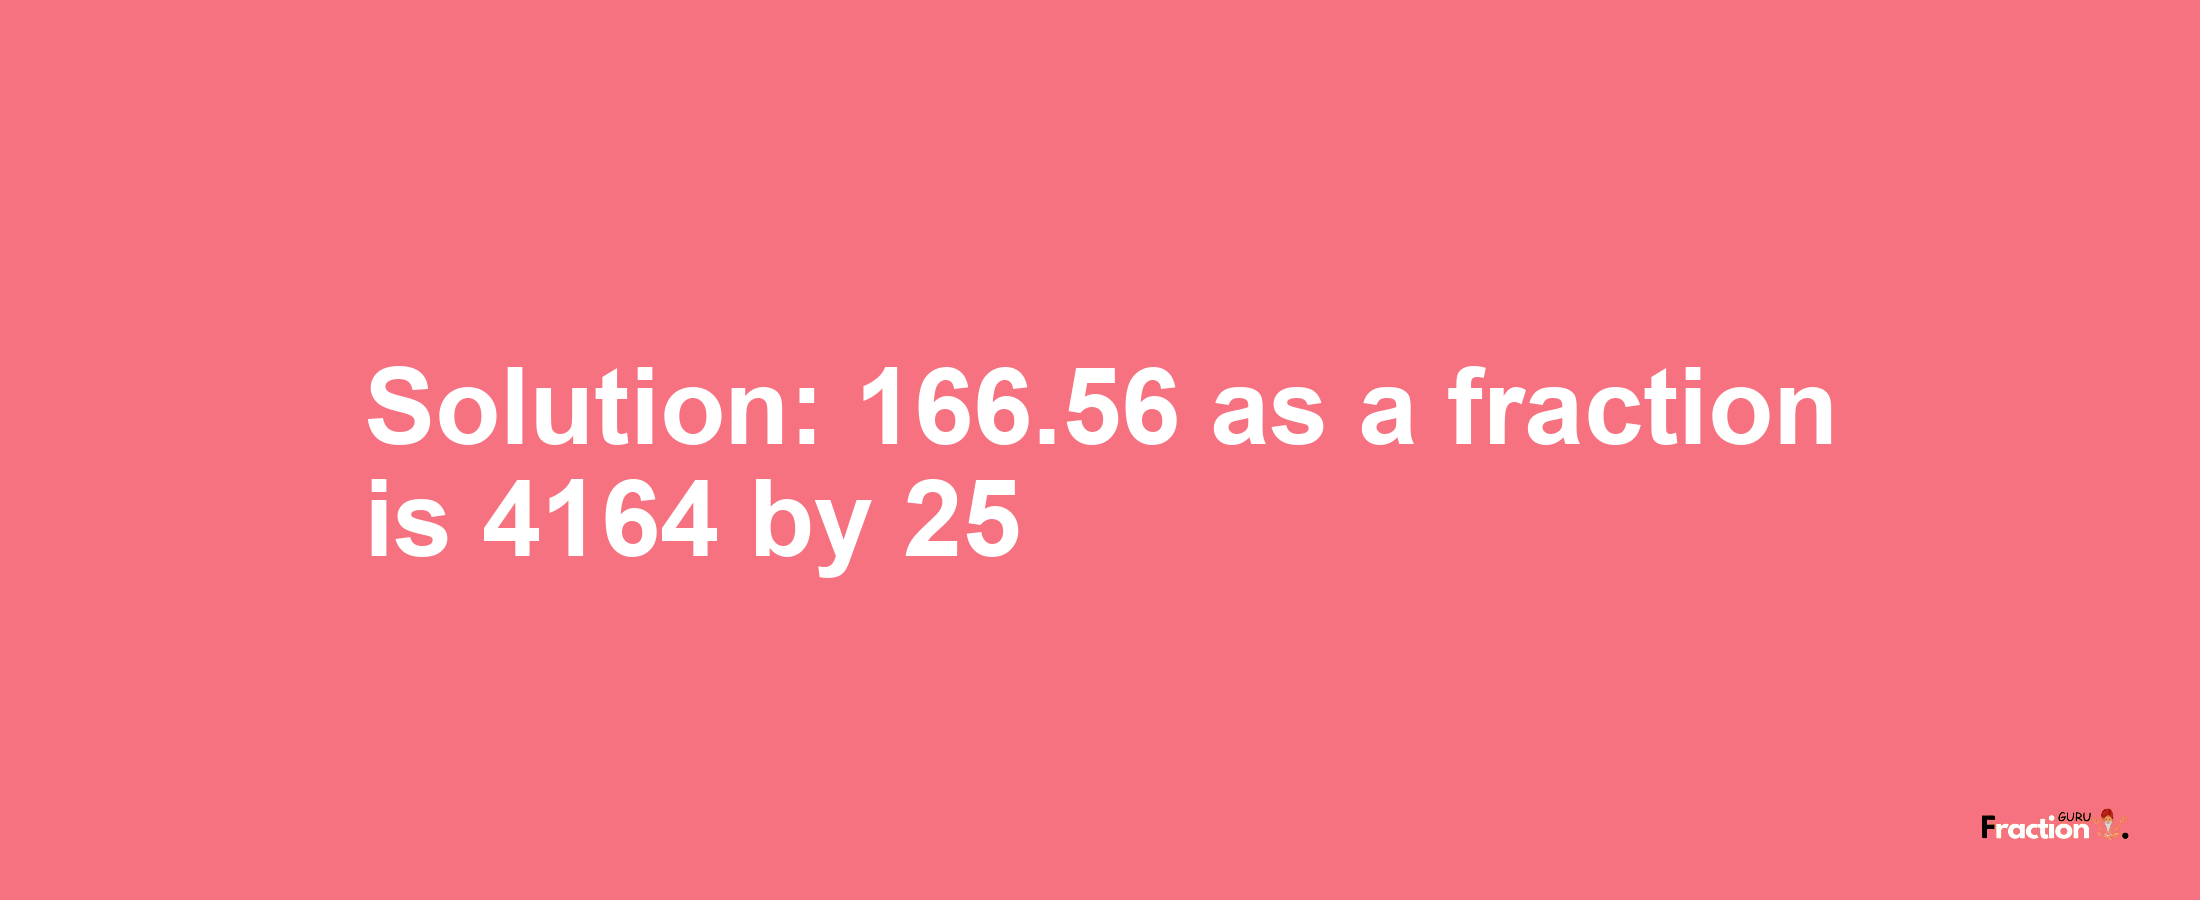 Solution:166.56 as a fraction is 4164/25